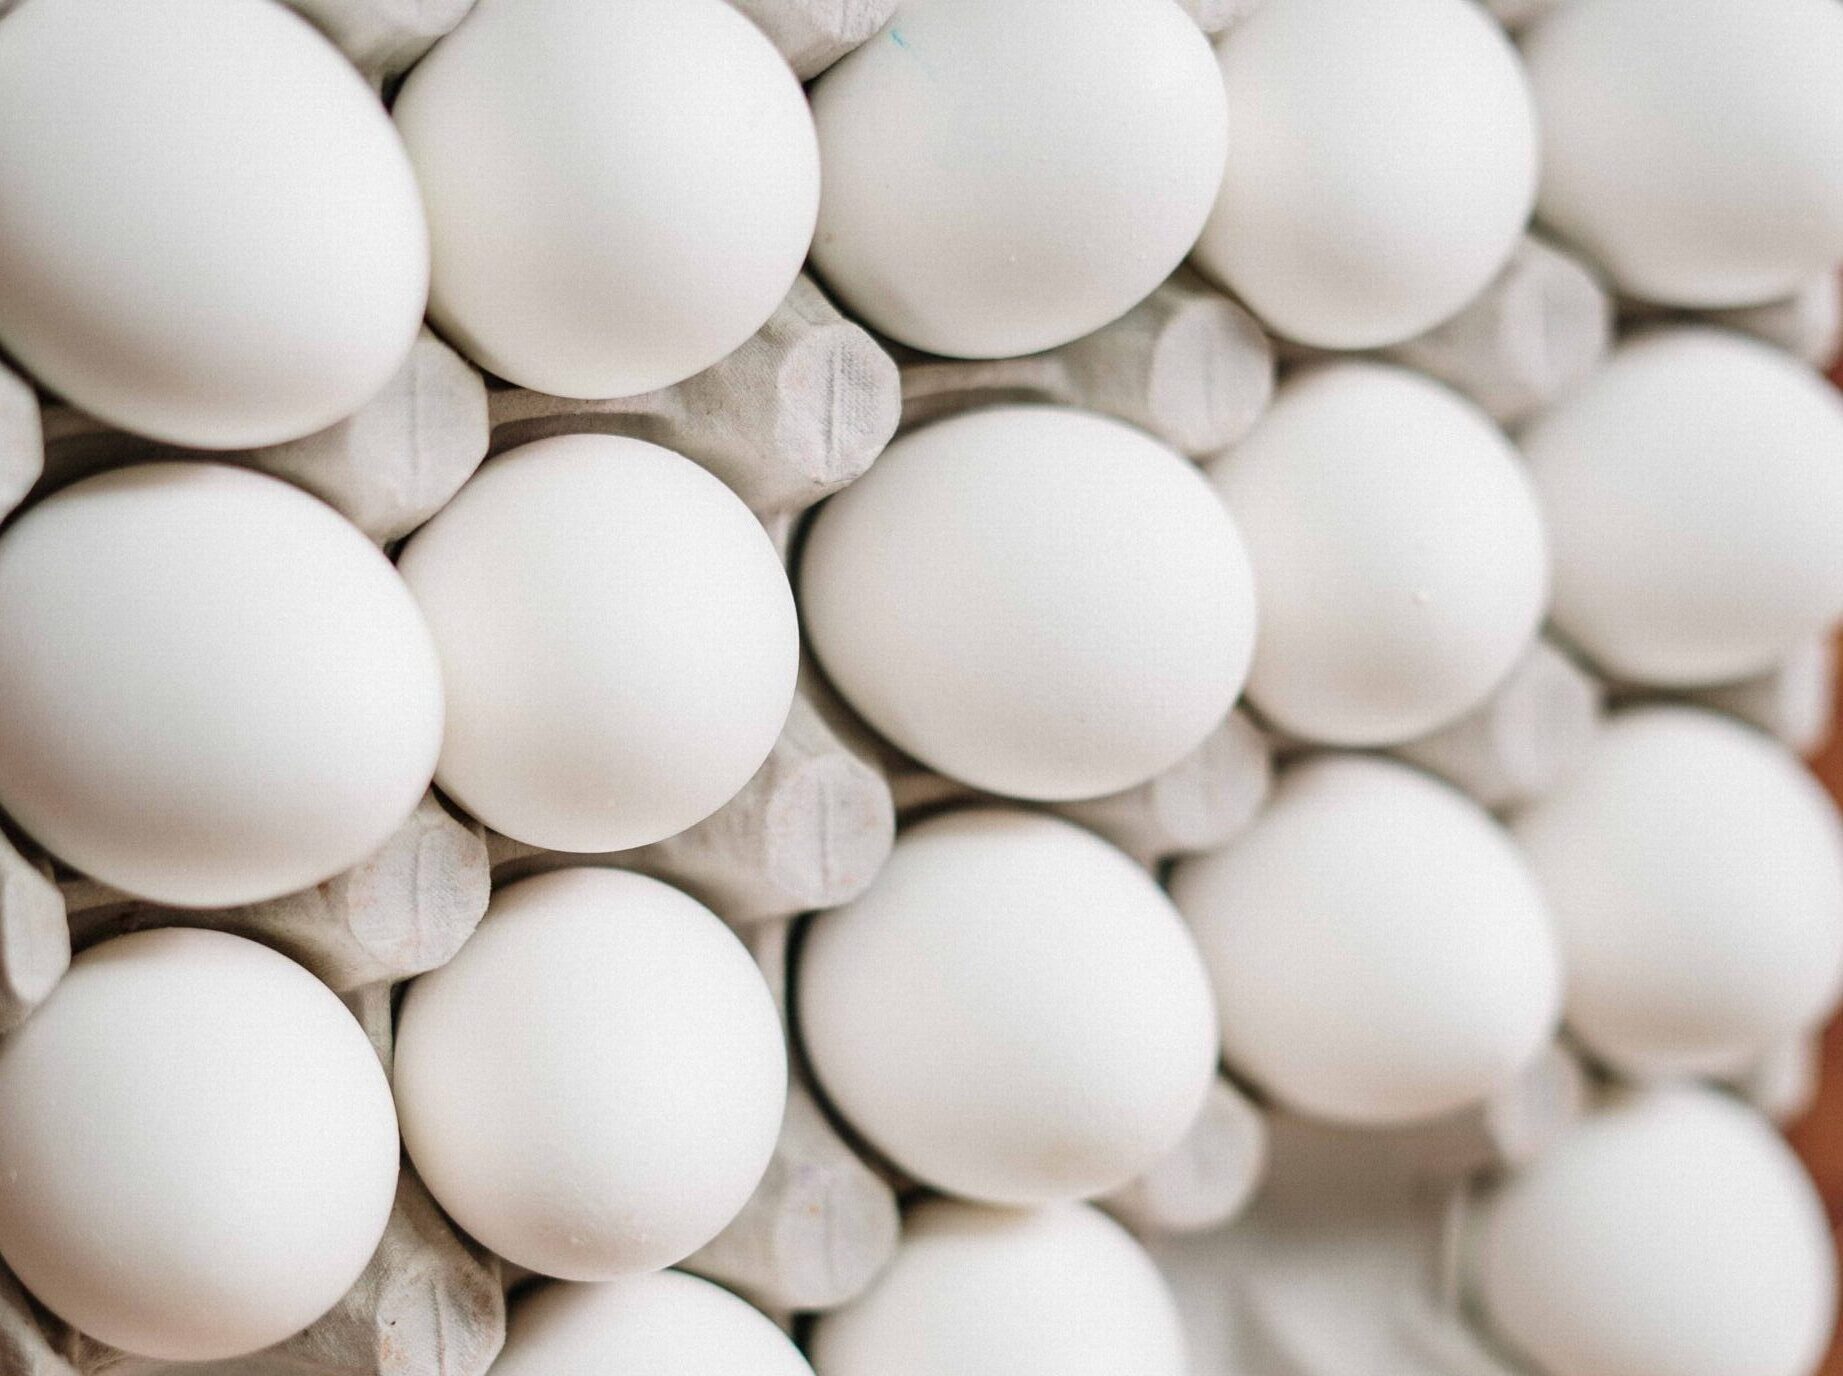 Egg-spensive Business: Exploring the Spike in Egg Prices and the Impact of Imports